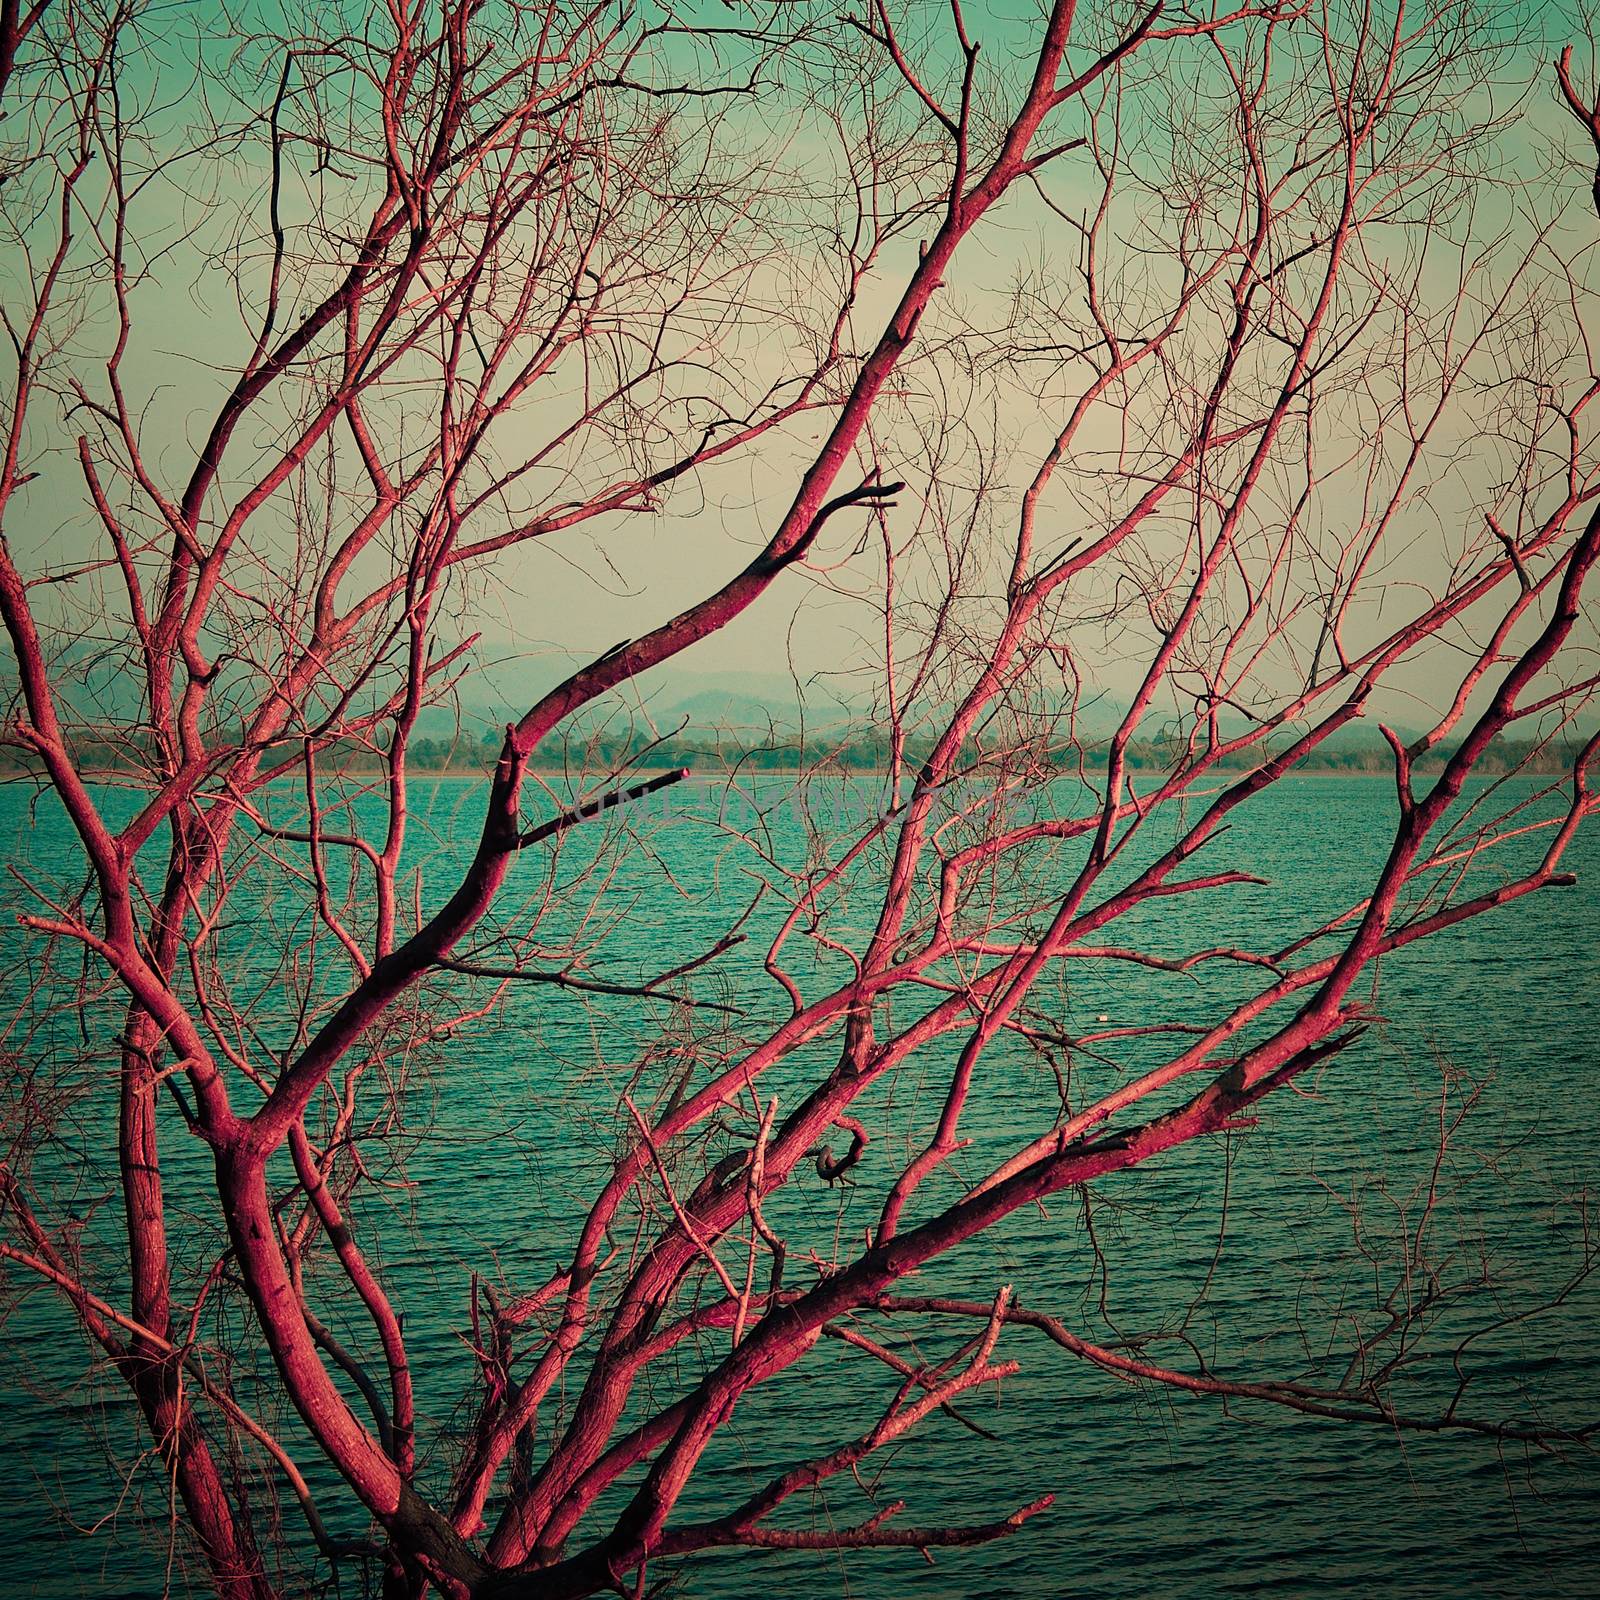 Vintage pink dry tree at lake, Abstract landscape